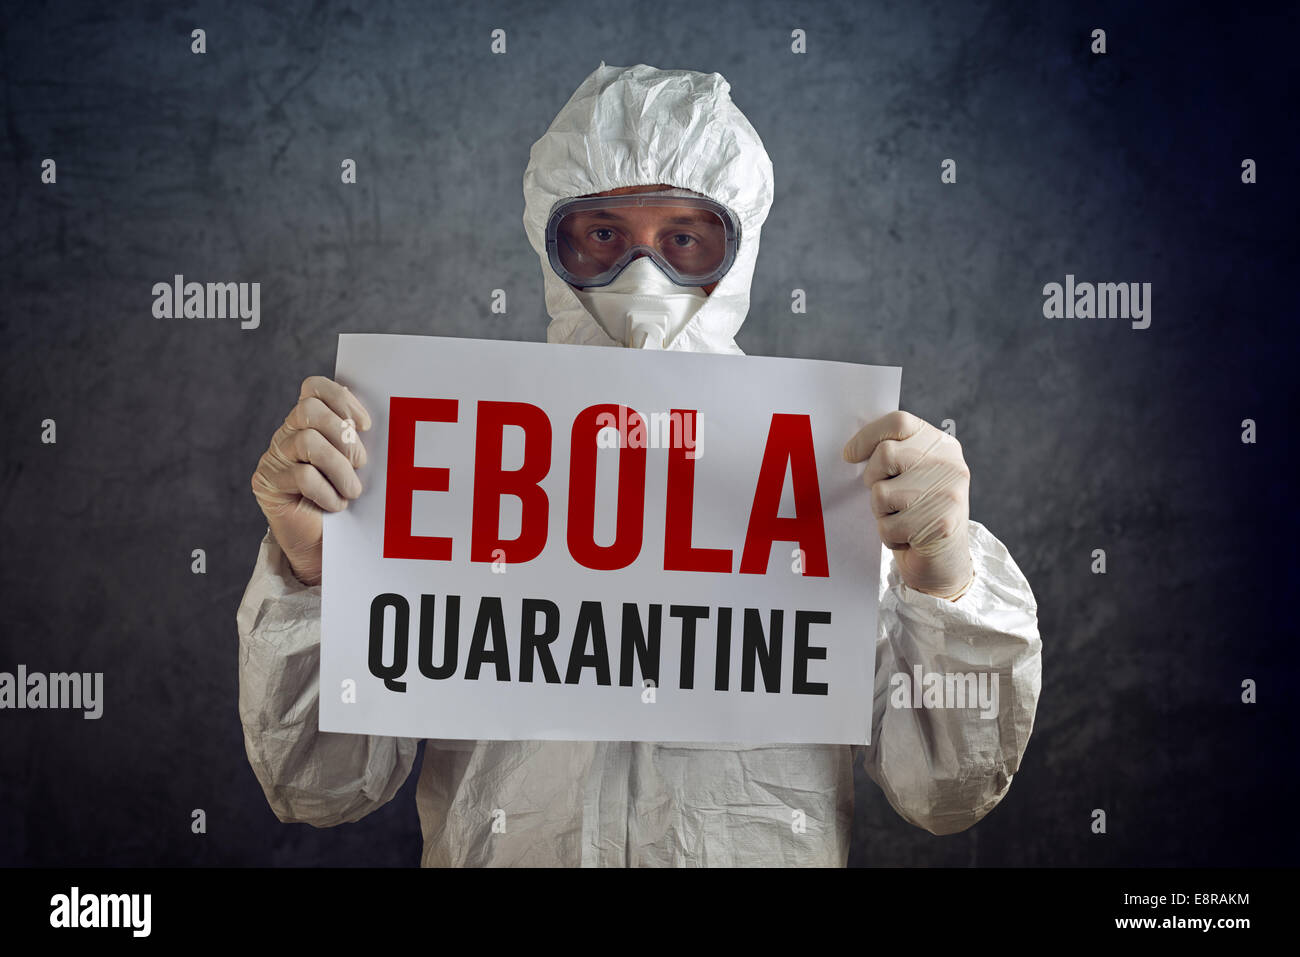 Ebola Quarantine sign held by medical healh care worker wearing protective gown, glowes, mask and goggles. Stock Photo